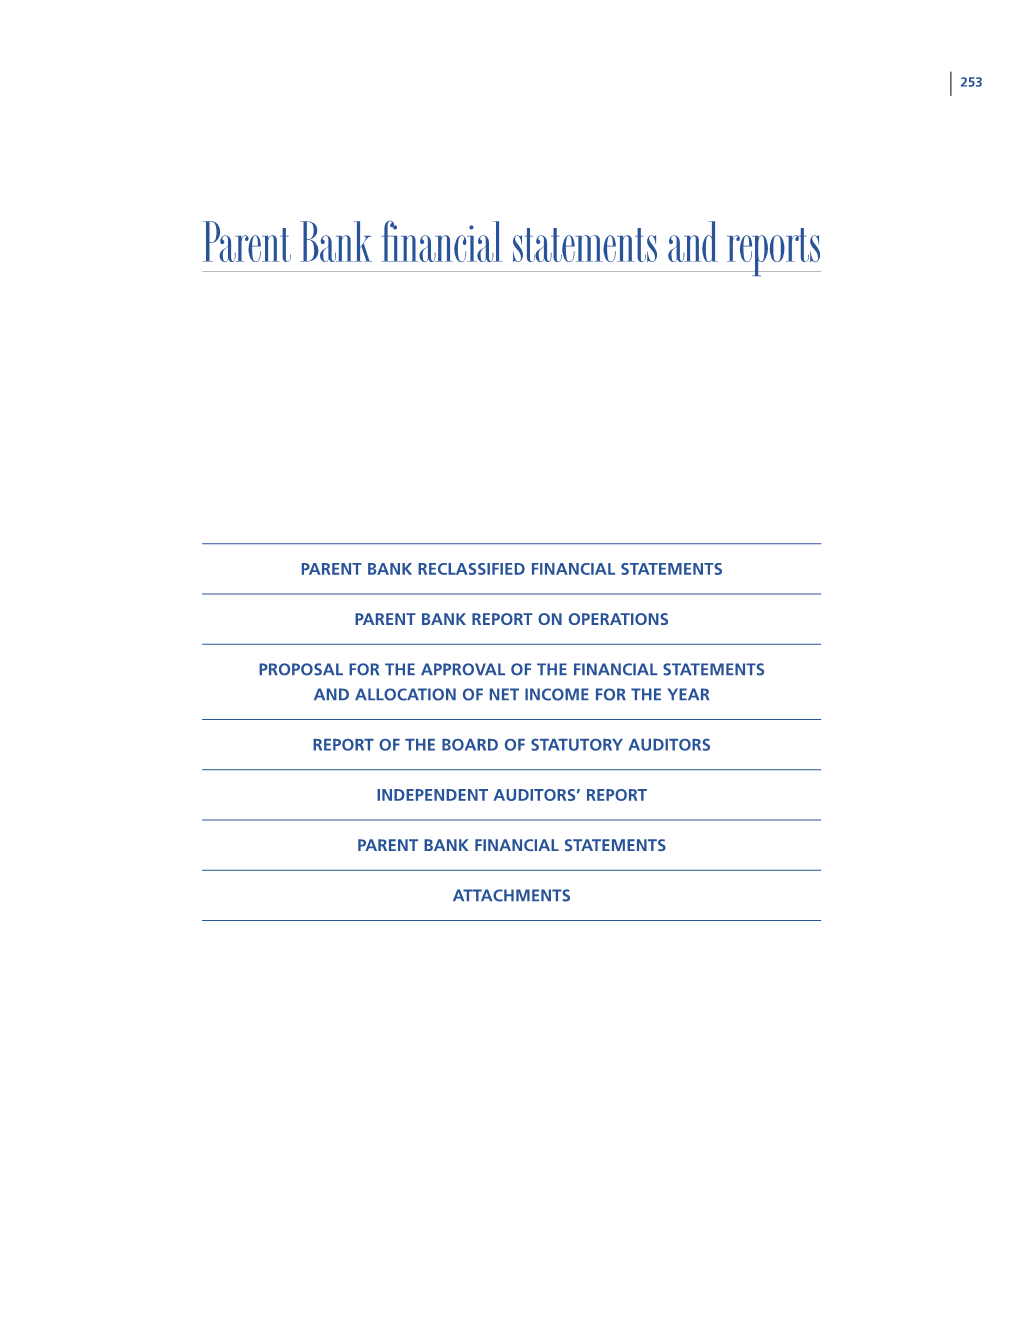 Parent Bank Financial Statements and Reports